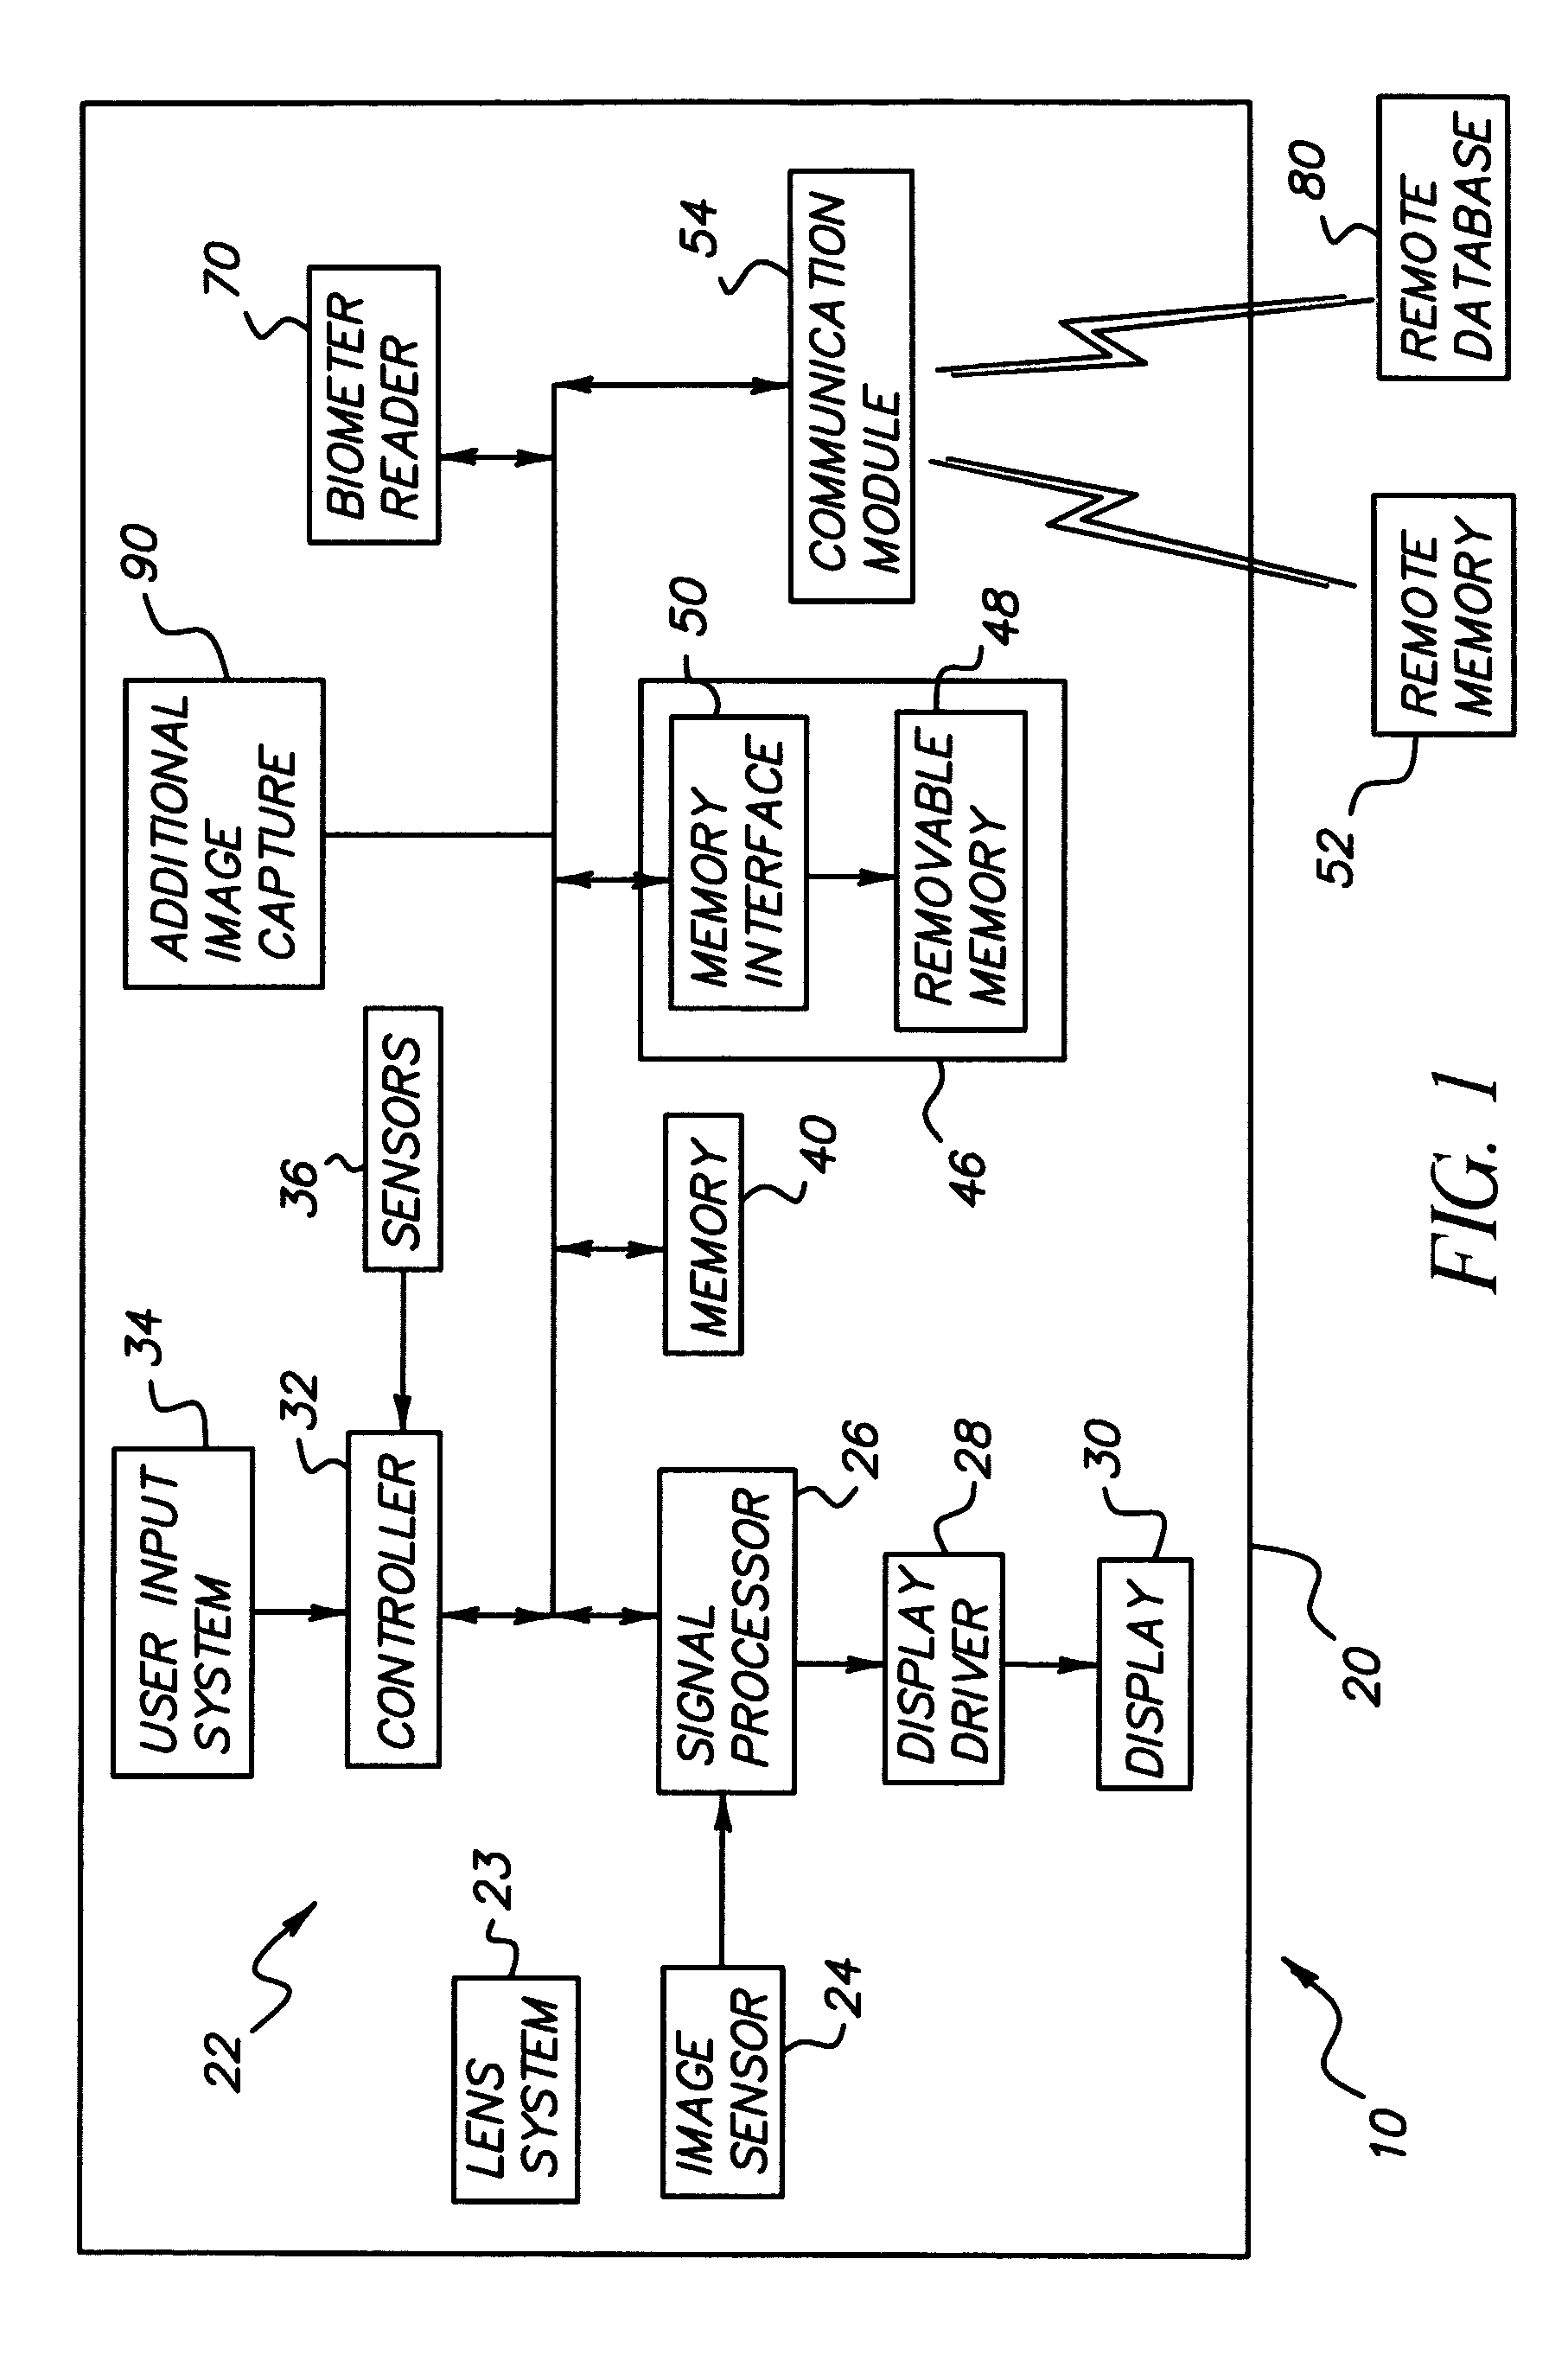 Wireless digital image capture device with biometric readers